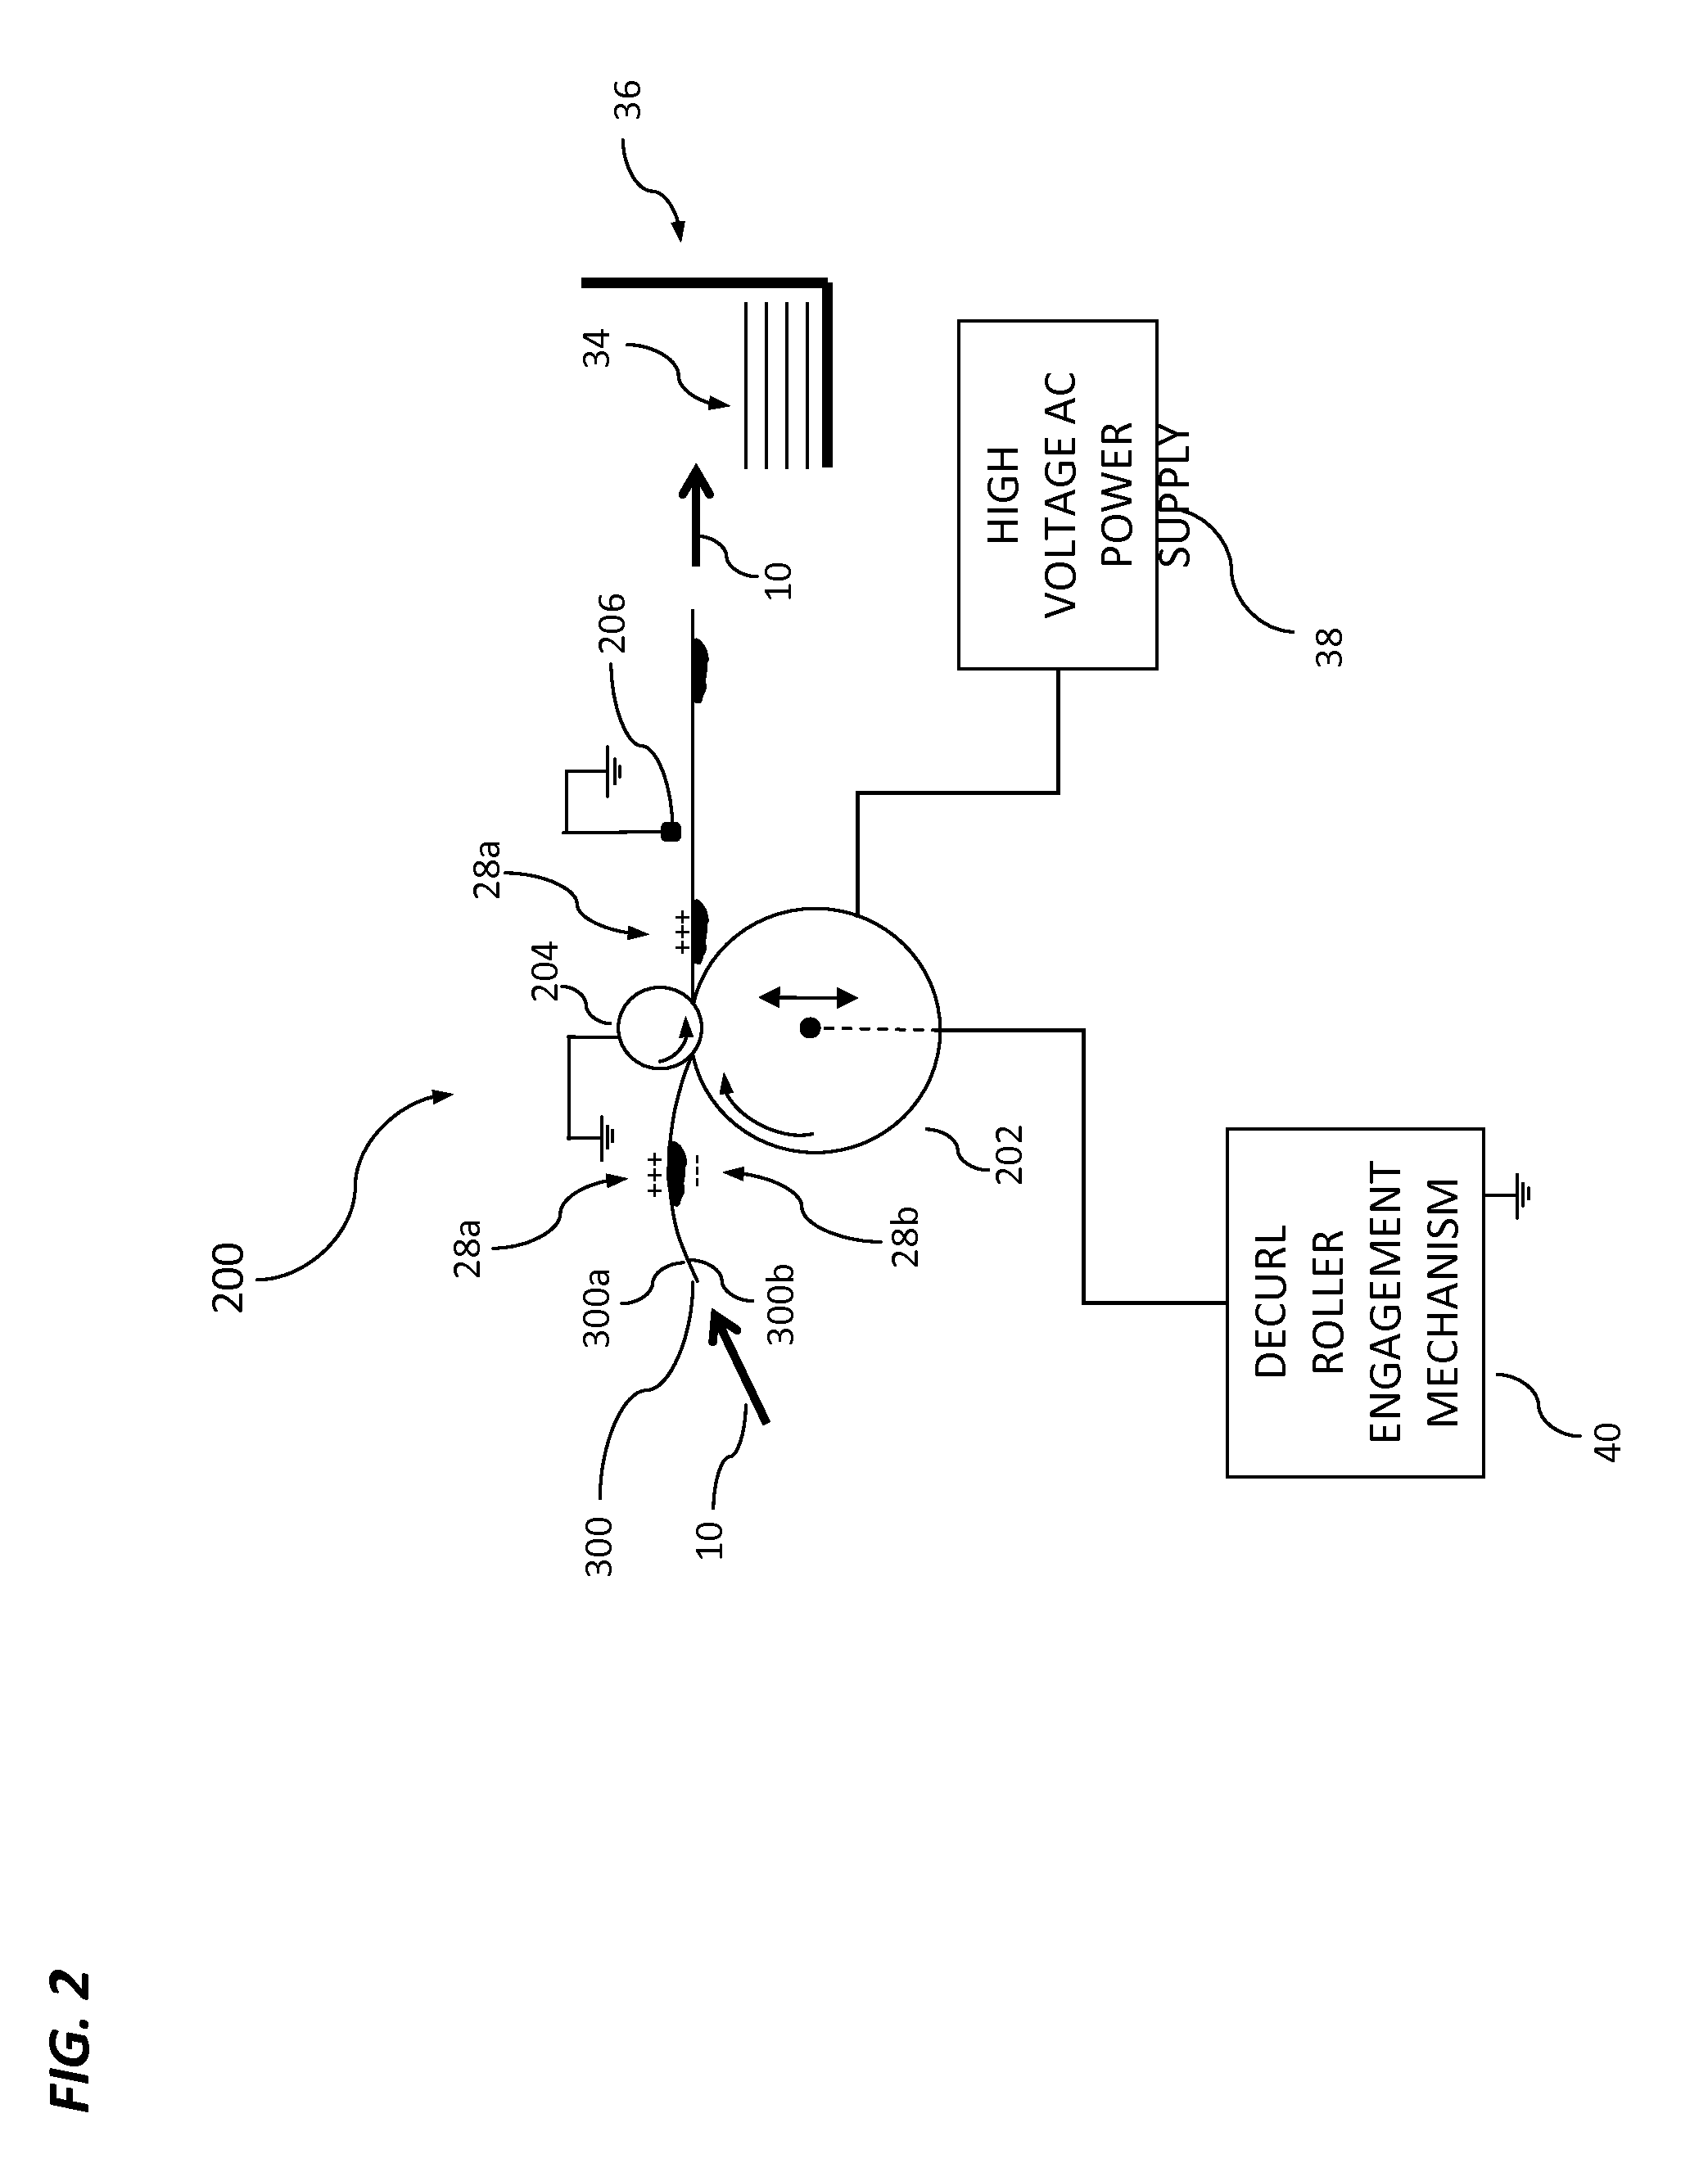 Concurrently removing sheet charge and curl